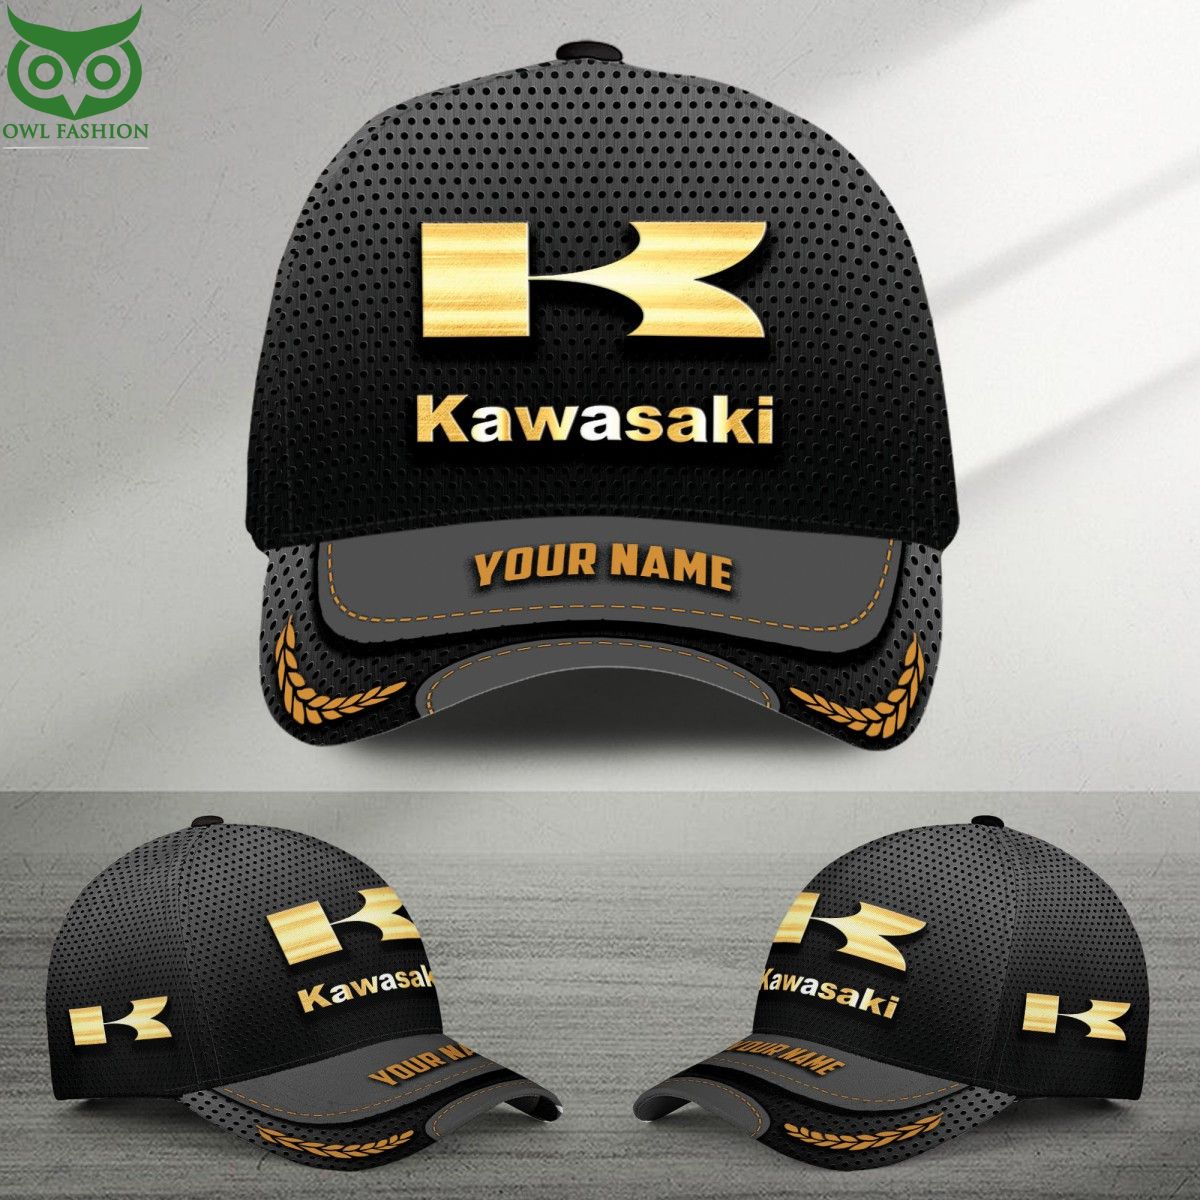 Kawasaki Motor Design New Classic Cap The use of negative space is ingenious.